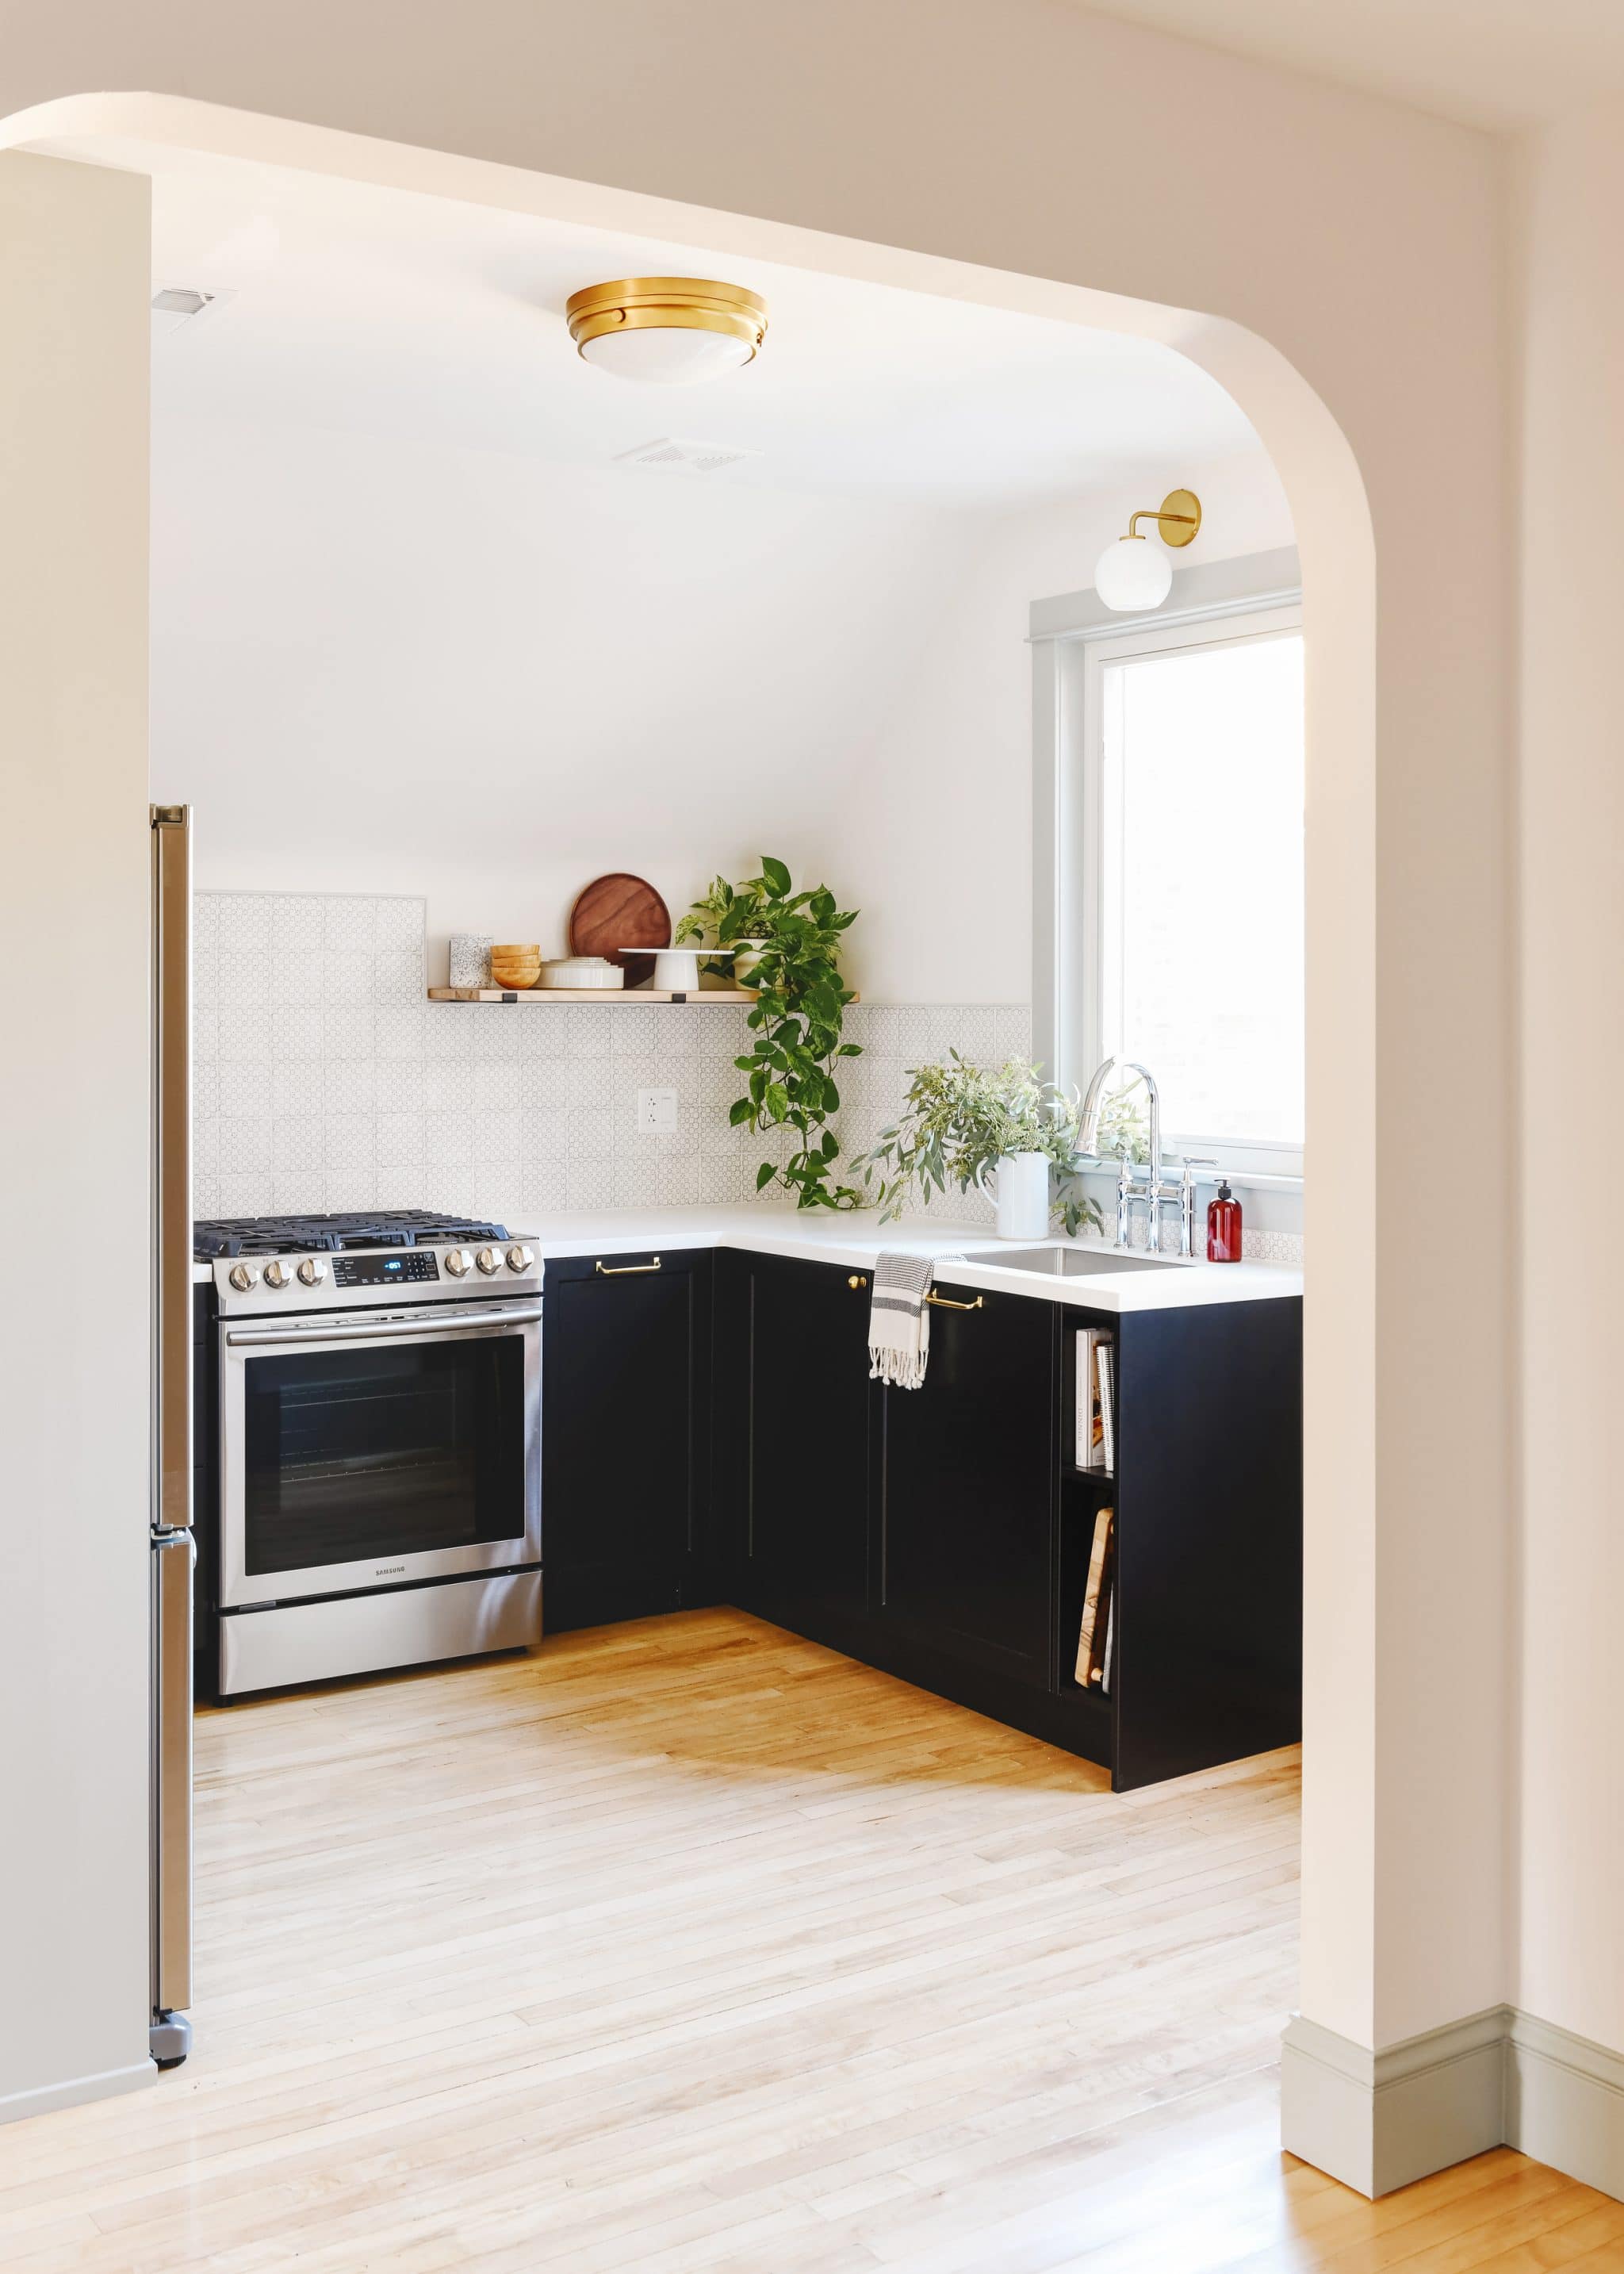 The kitchen in Unit 2 of our two flat was built using IKEA SEKTION cabinets with doors from Semihandmade. The contrast of the black lower cabinets and light countertops was just the pop we were looking for!